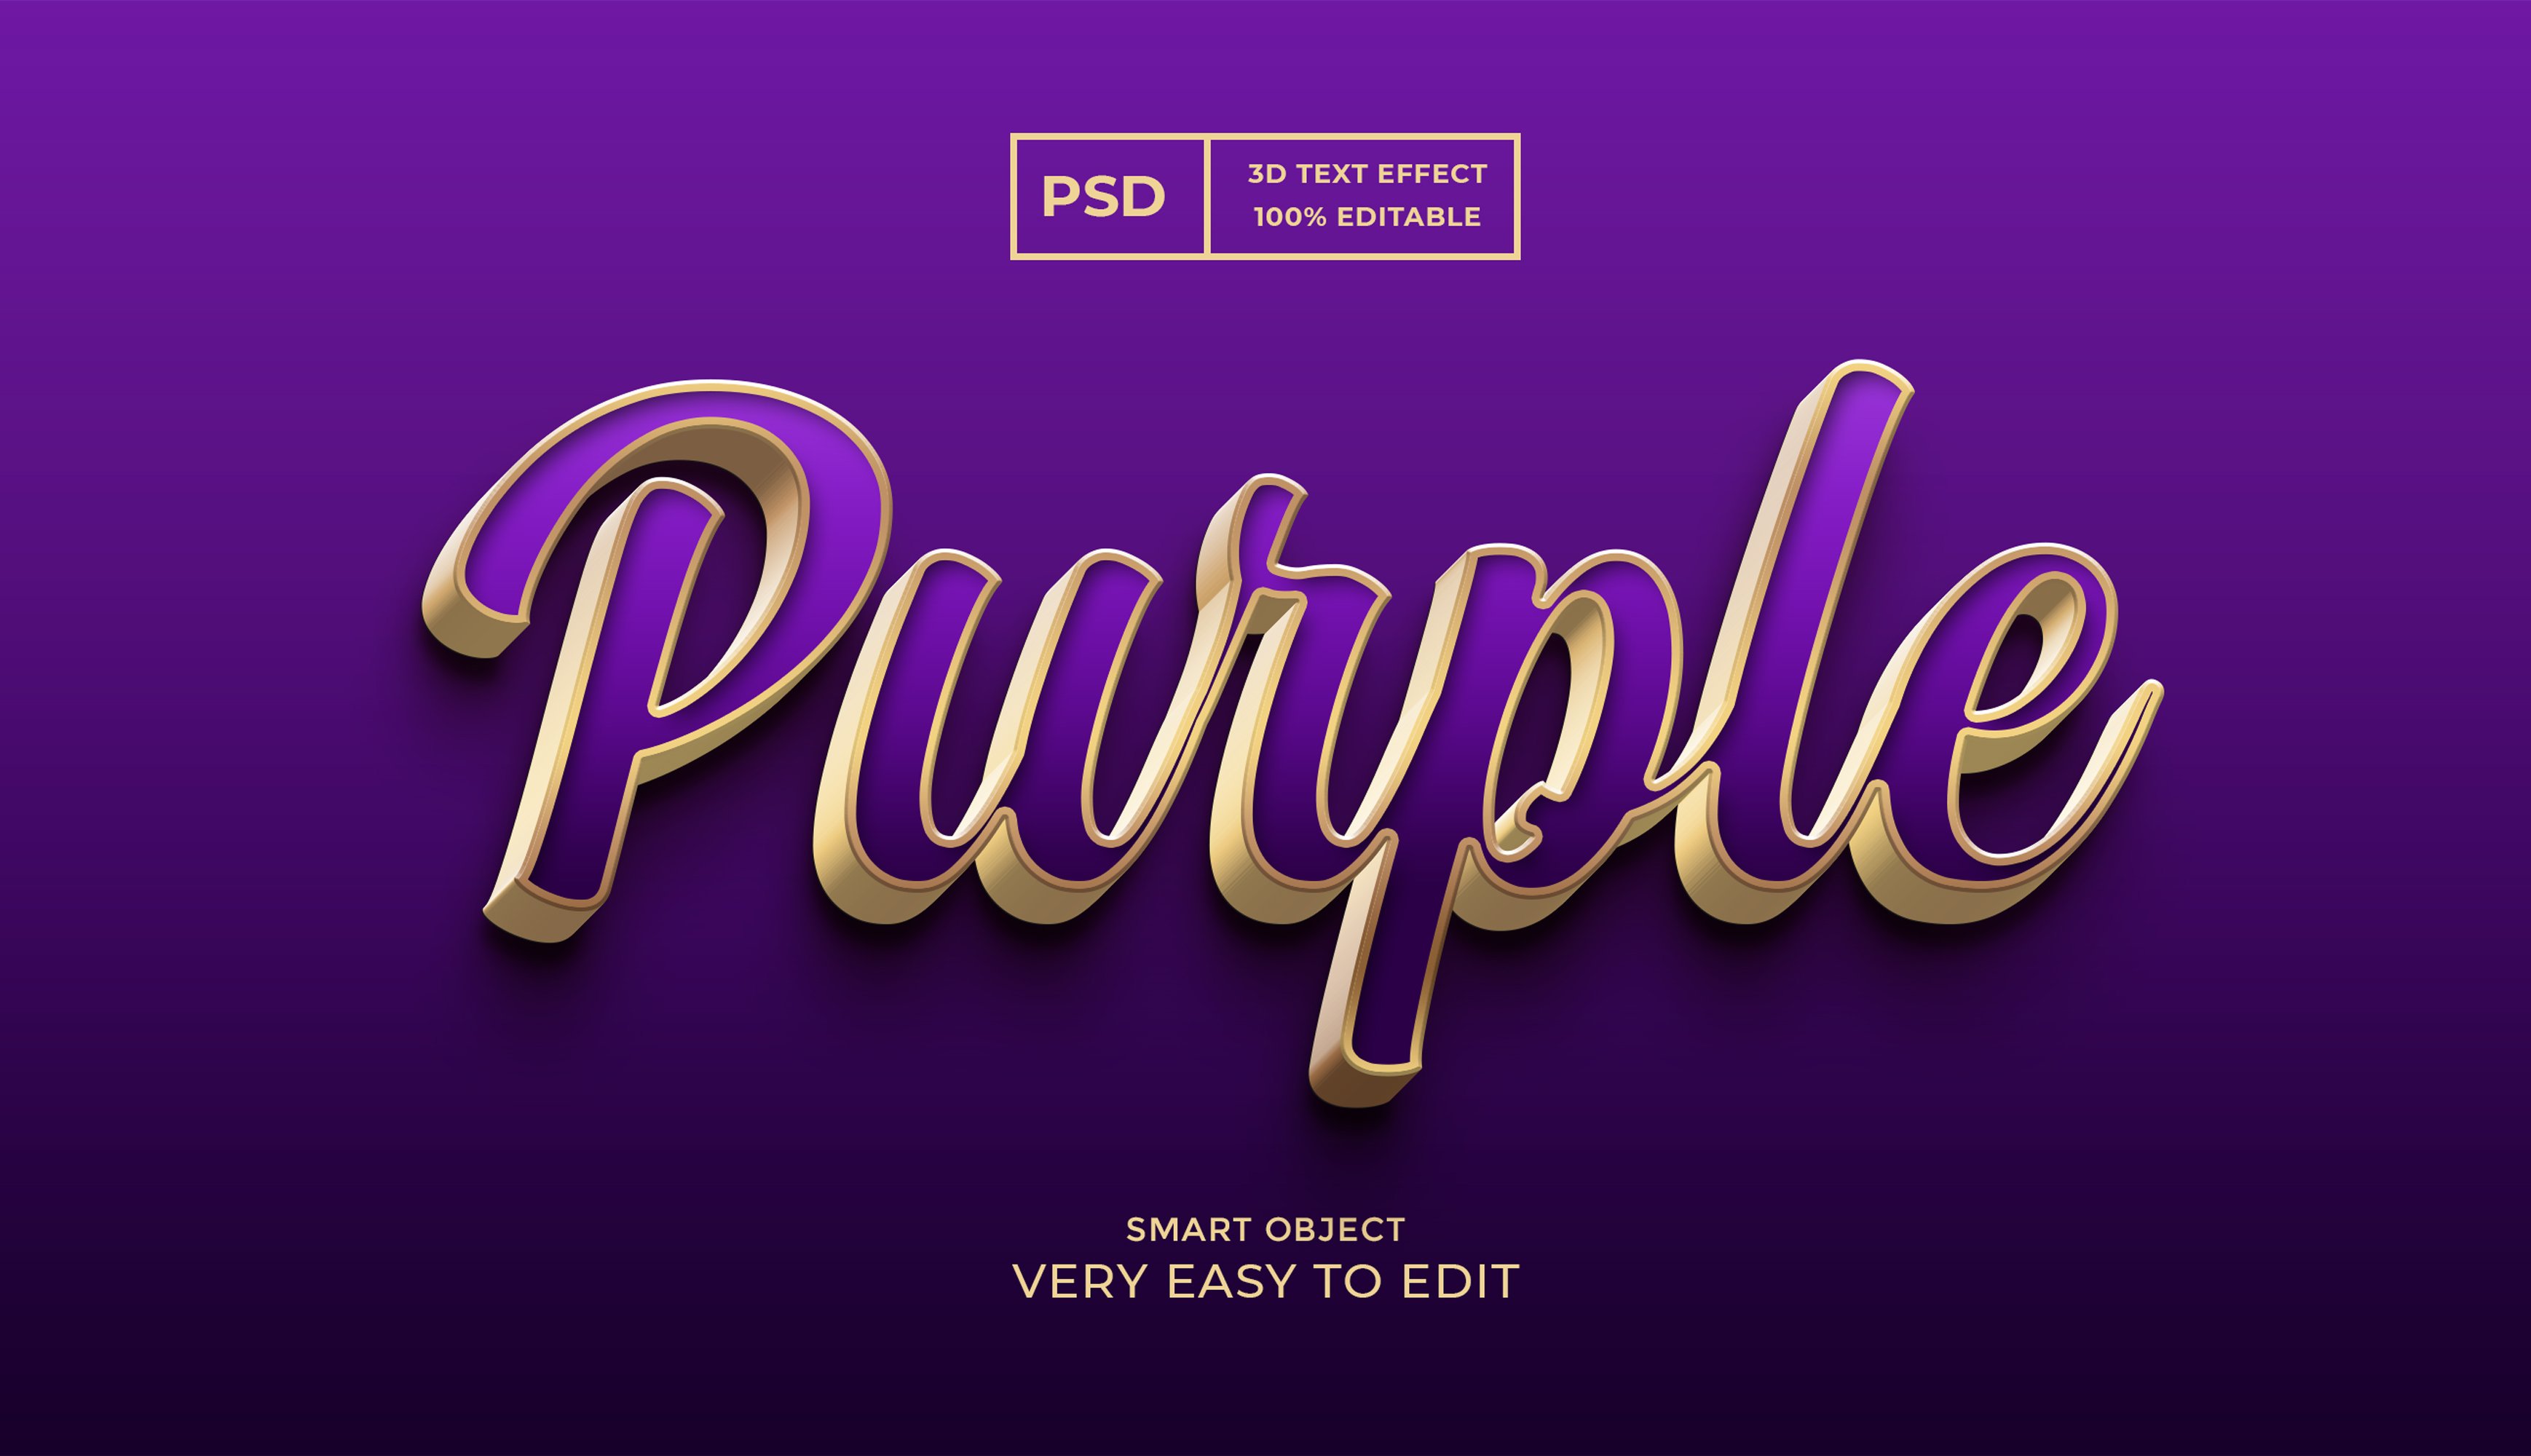 Purple 3d text style effect psdcover image.